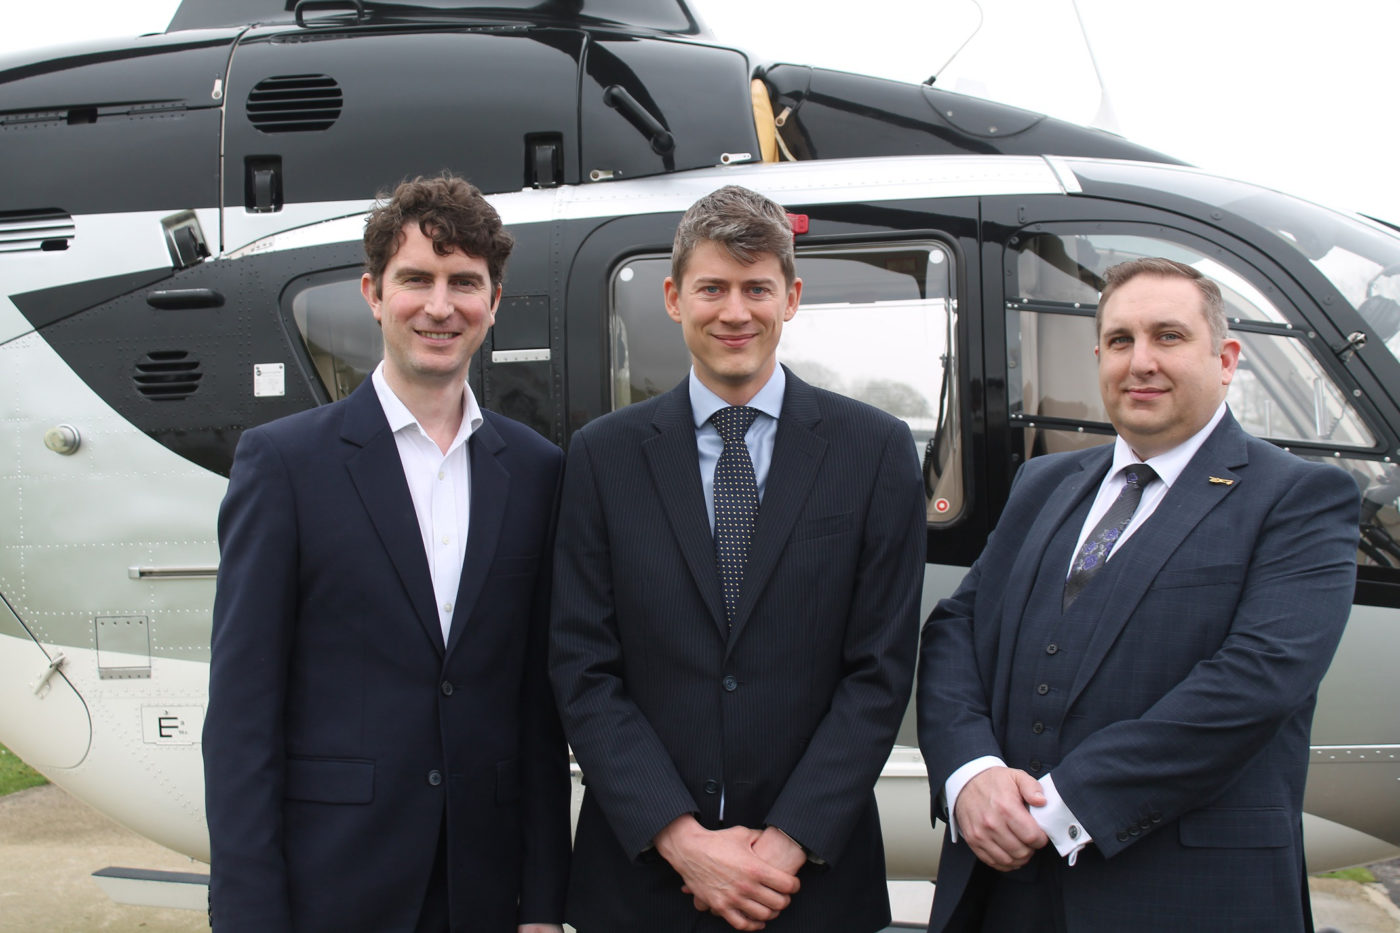 From left: FLYT's director and chief finance officer, James Matthews; CEO and co-founder, Andy King; and co-founder and aviation director, James Palmer. Ian Frain Photo